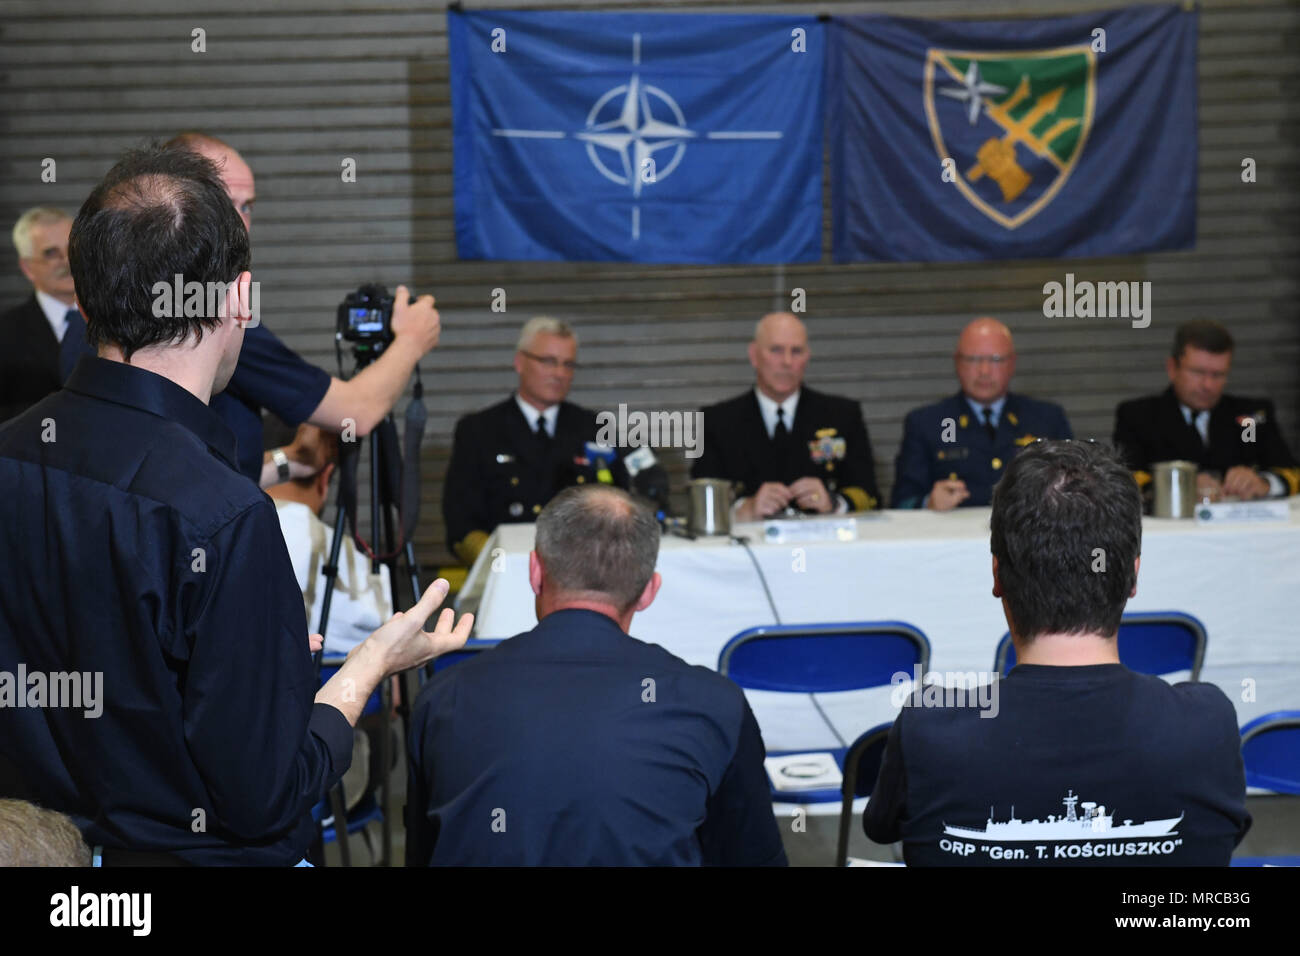 170603-N-JI086-480 - SZCZECIN, Poland (June 3, 2017) A member of the Polish media asks members of the Naval Striking and Support Forces NATO leadership a question at a press conference aboard the Danish Absalon-class combat support ship HDMS Absalon (L16) during the pre-sail portion of exercise BALTOPS 2017, June 3, 2017. BALTOPS is an annual U.S.-led, Naval Striking and Support Forces NATO-executed, multinational maritime exercise in the Baltic Sea region designed to enhance flexibility and interoperability among its participants. (U.S. Navy photo by Mass Communication Specialist 3rd Class Fo Stock Photo